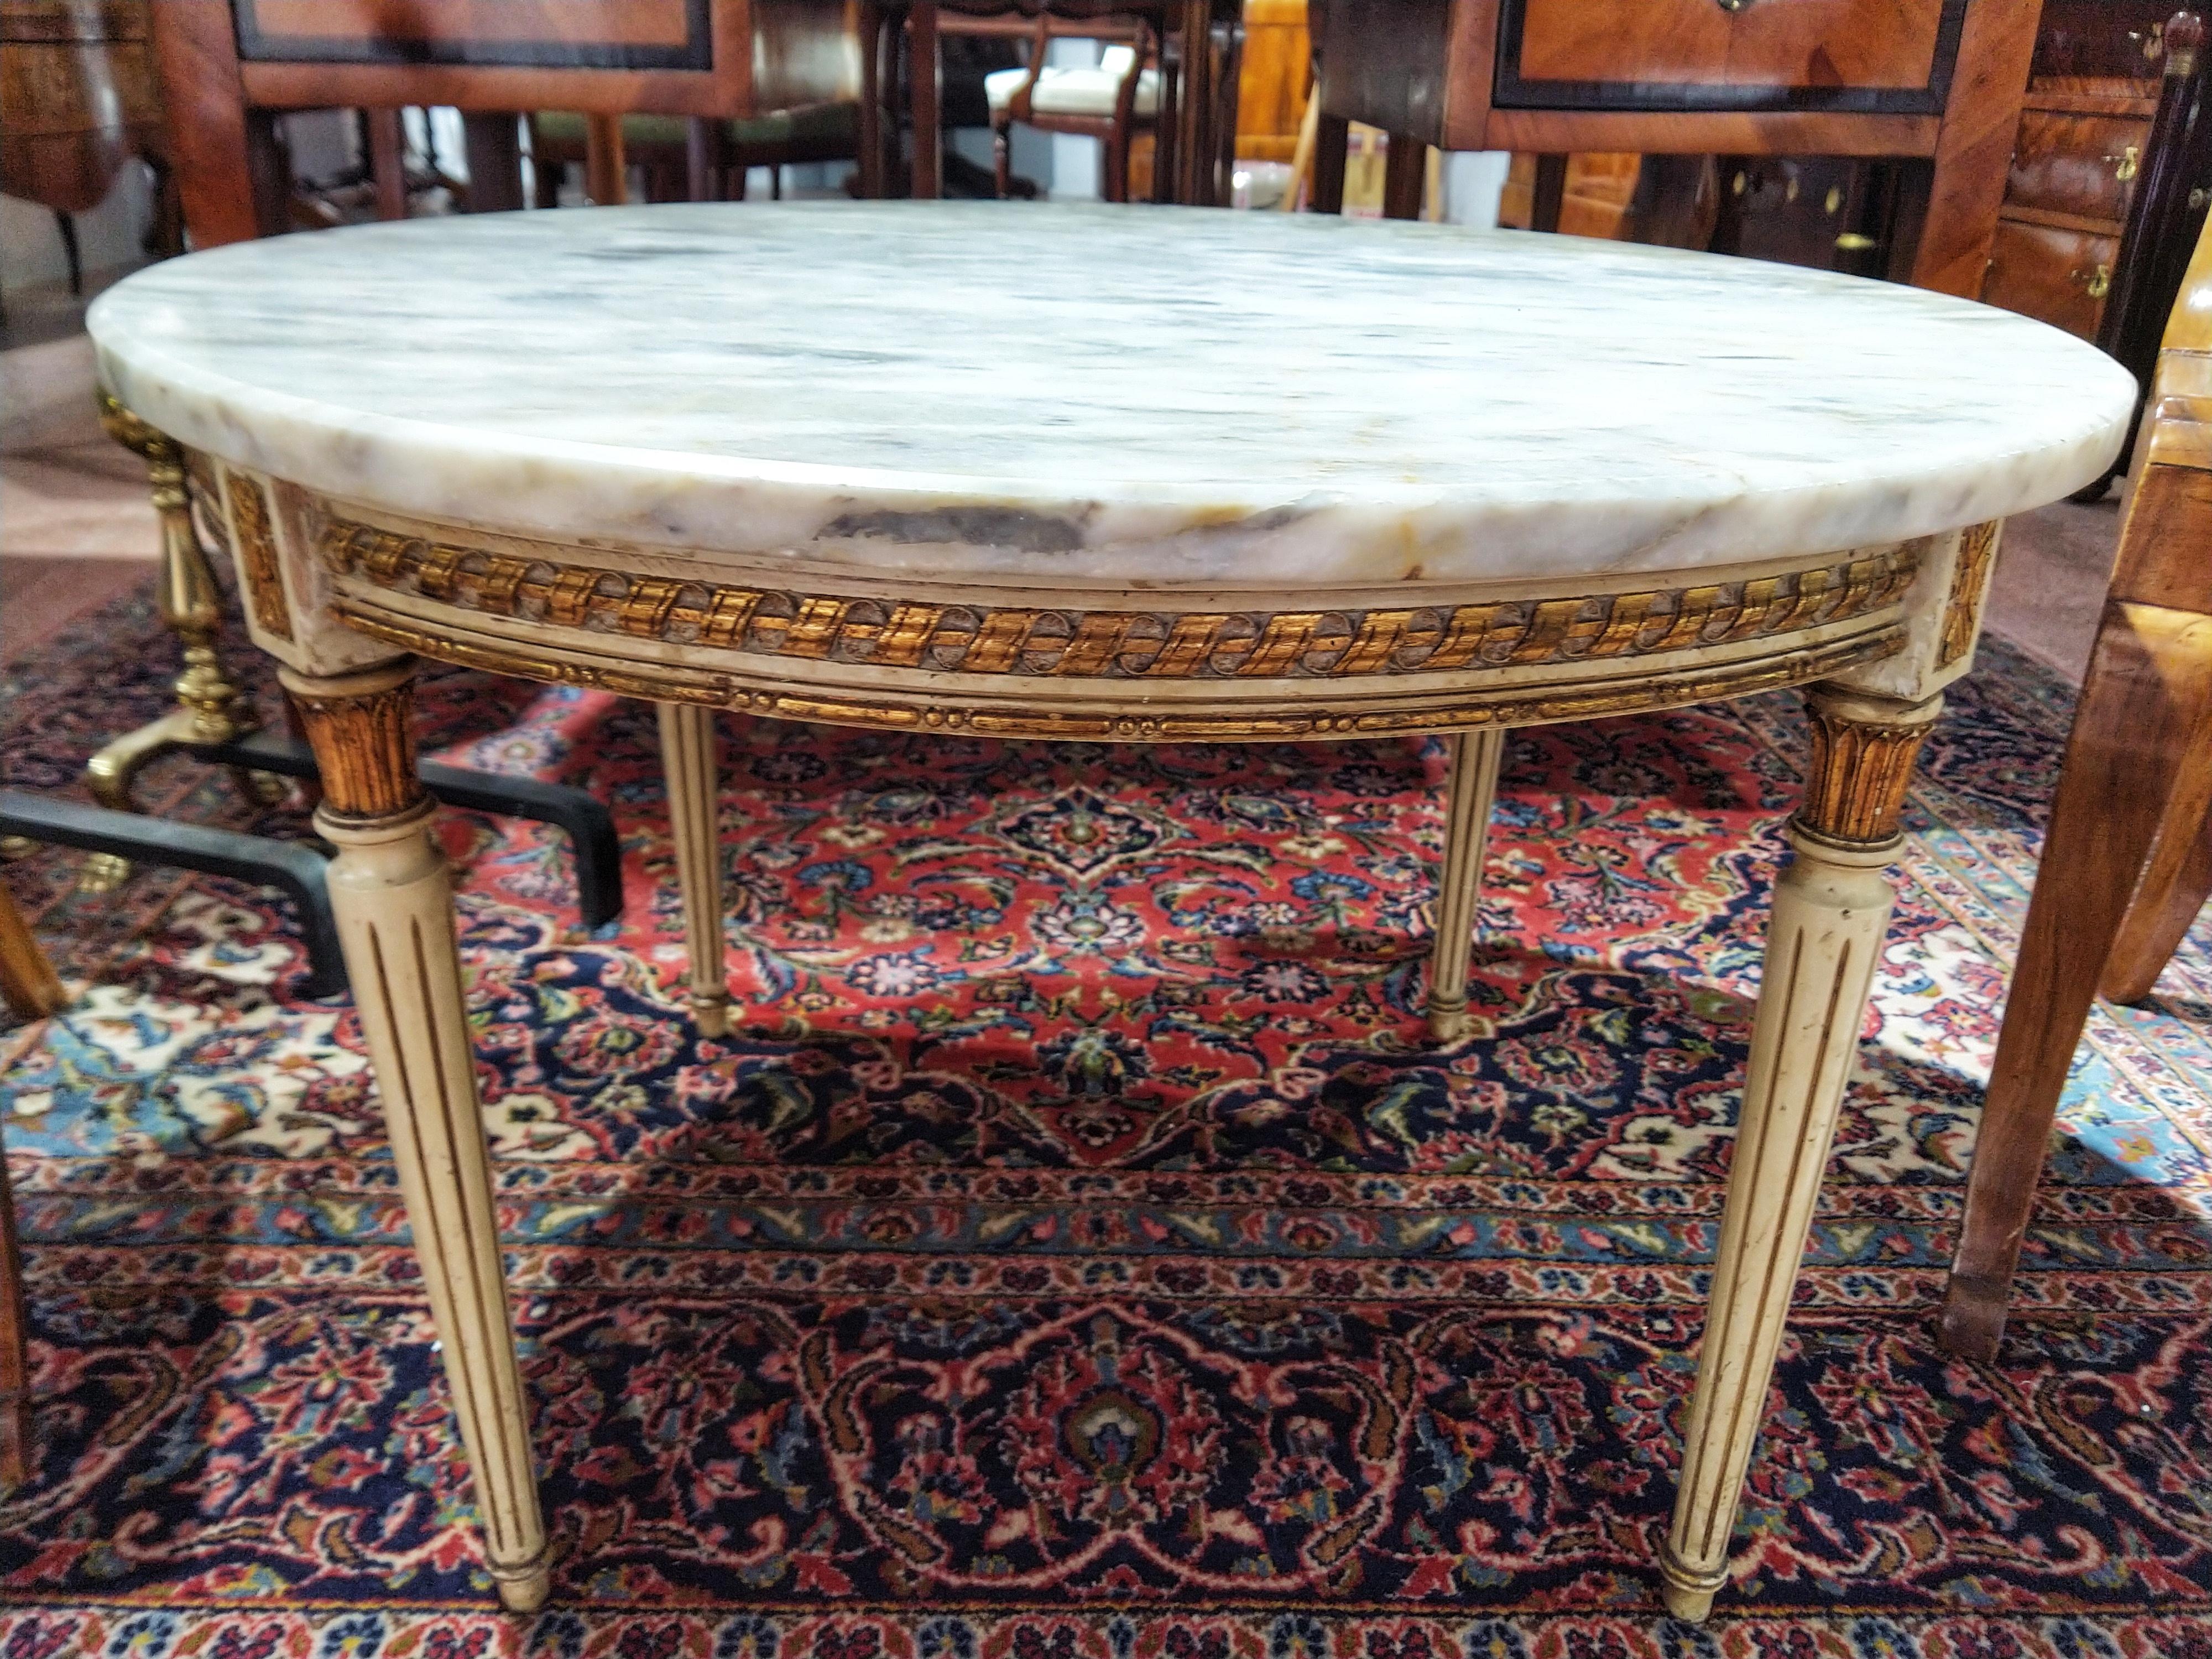 Beautiful Louis XVI style low center table. The wood is colored, carved and gilded, the top of Italian marble Calacatta Fabbricotti stands out for its white color with gray and gold veins giving it a further regal touch. A very elegant and tasteful